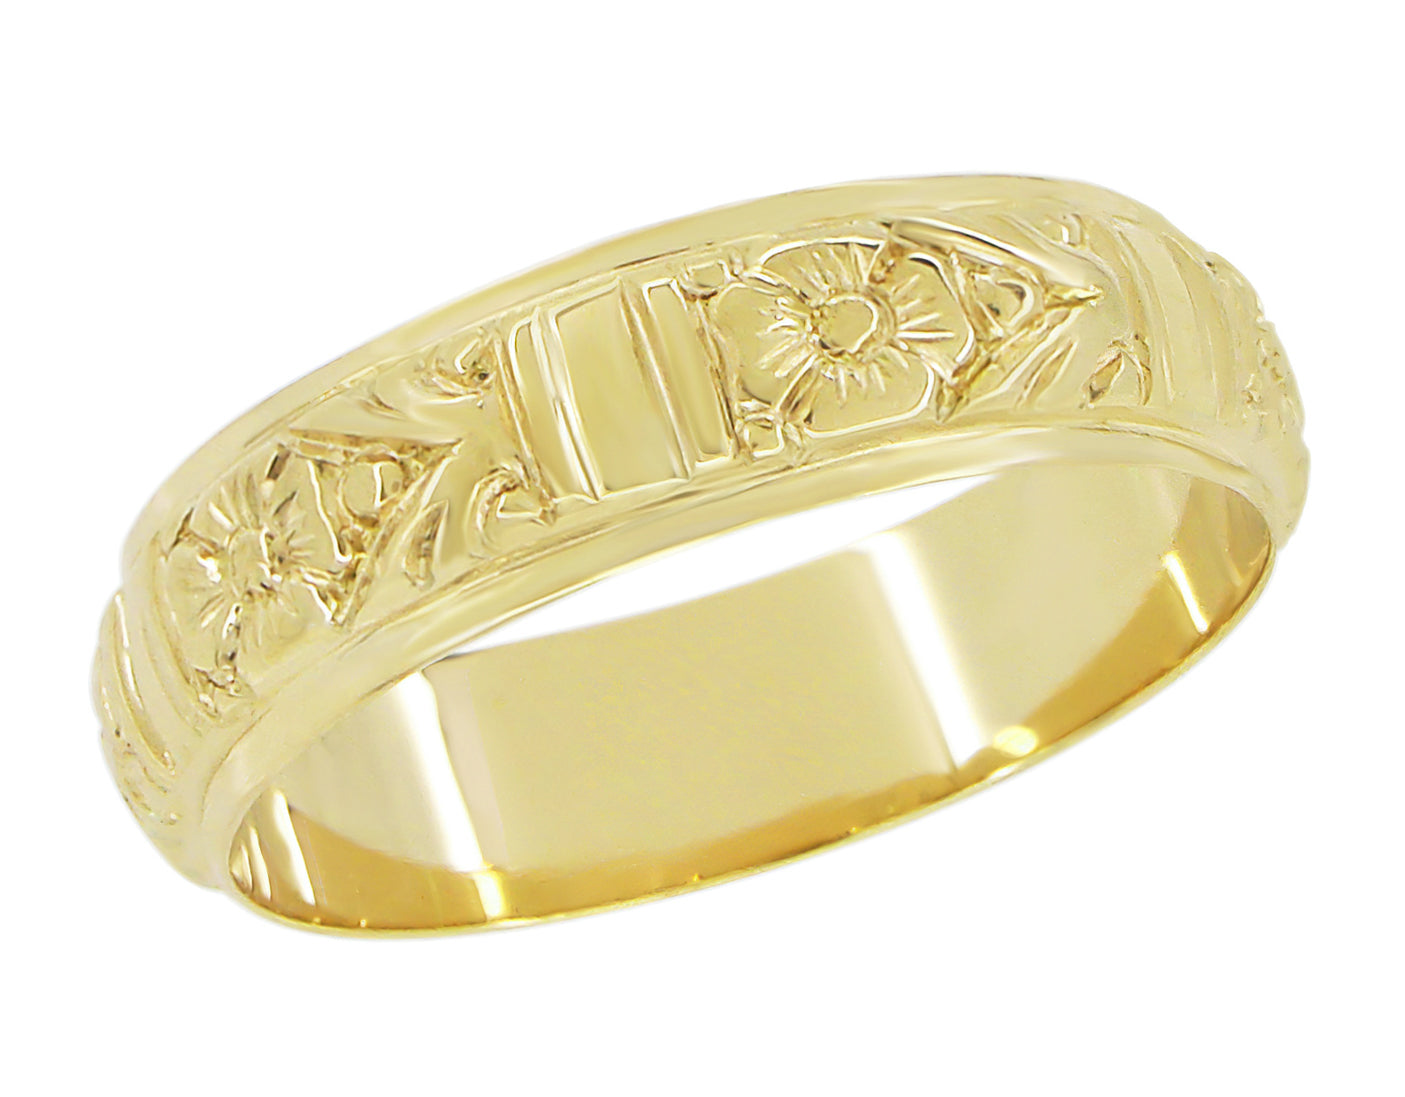 14K or 18K Yellow Gold Vintage Wedding Band with a Deep Hand Carved Floral Design 6mm Wide - R885Y